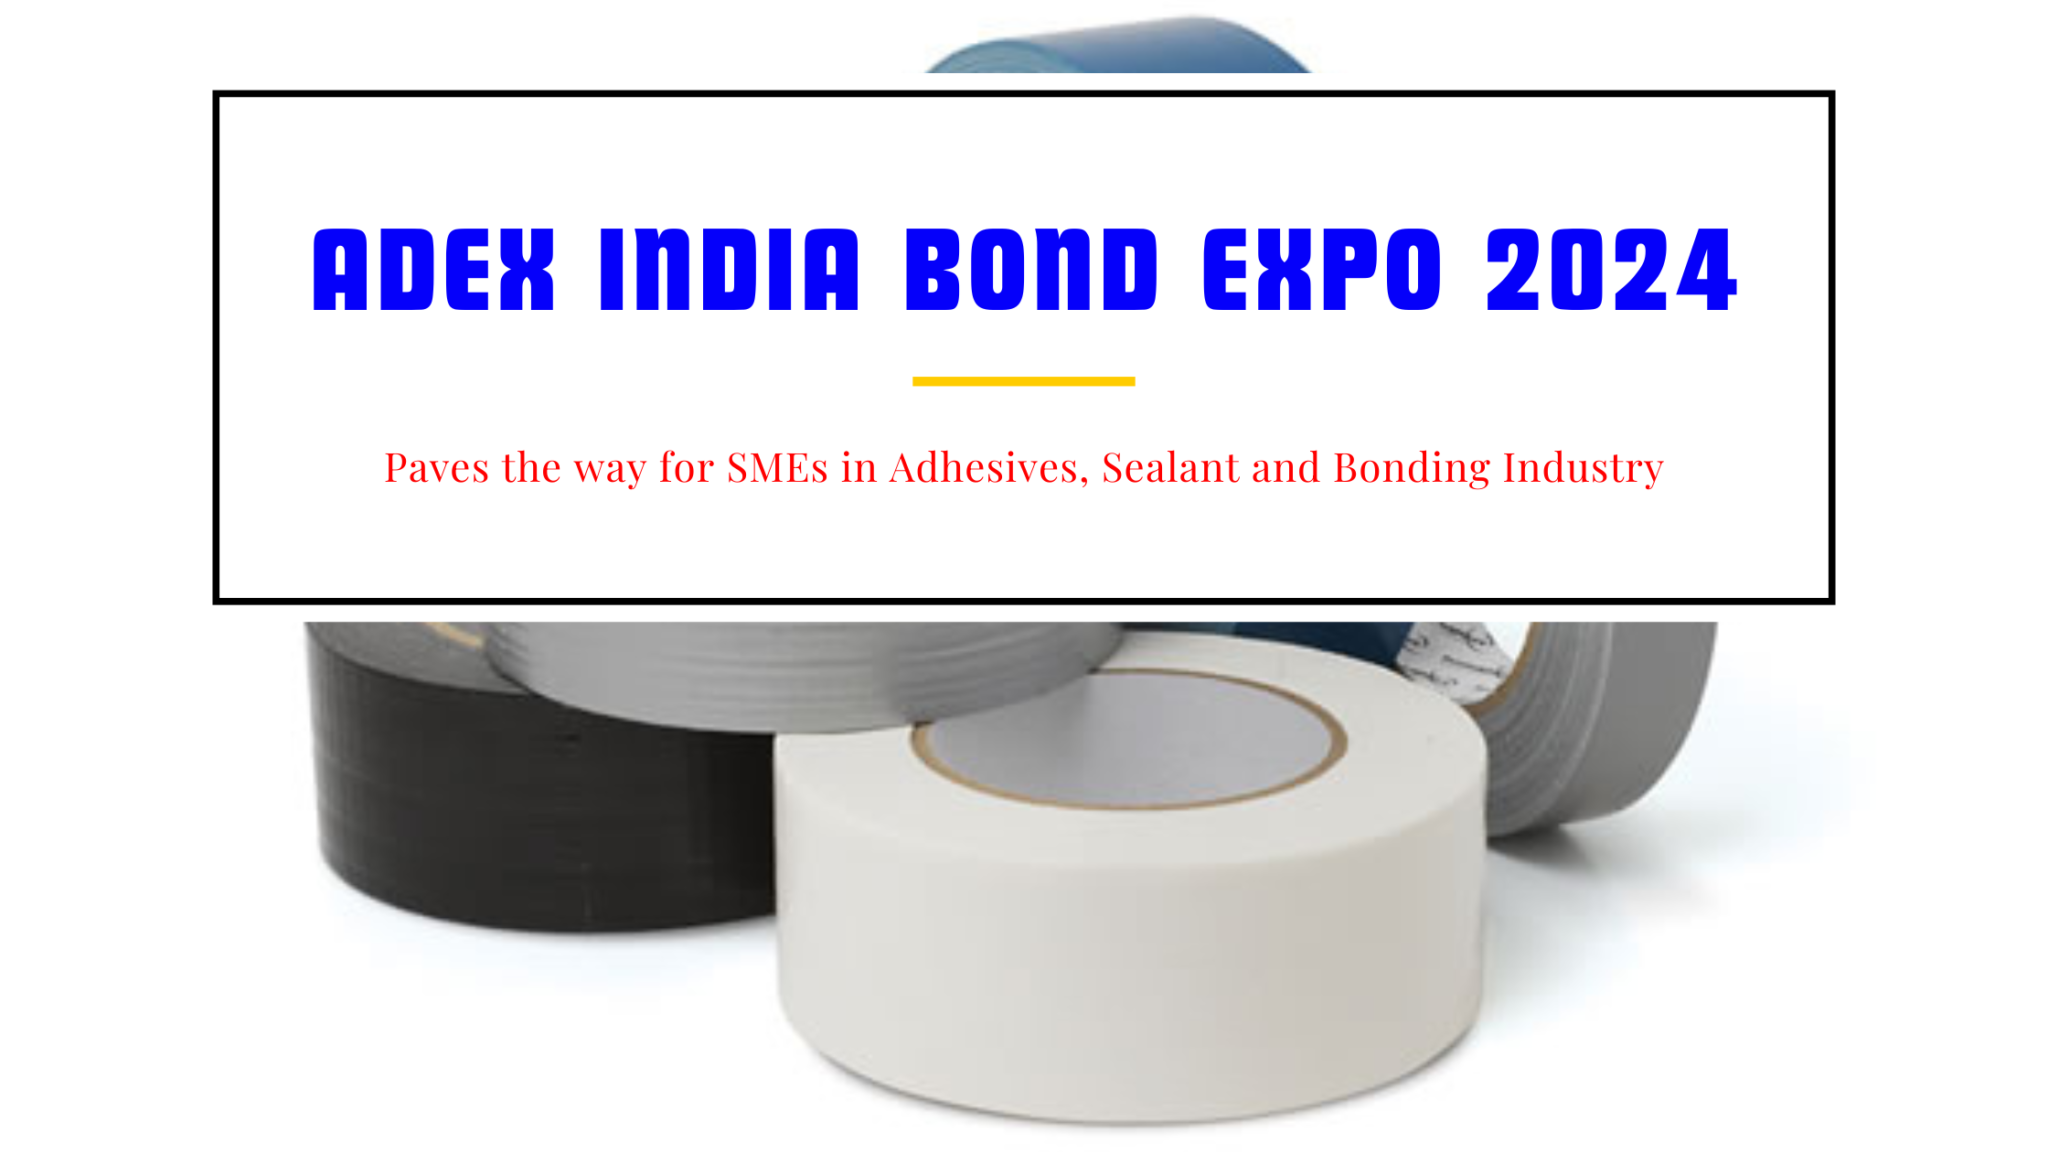 ADEX India Bond Expo 2024 Paves the Way for SMEs in Adhesives Sealant